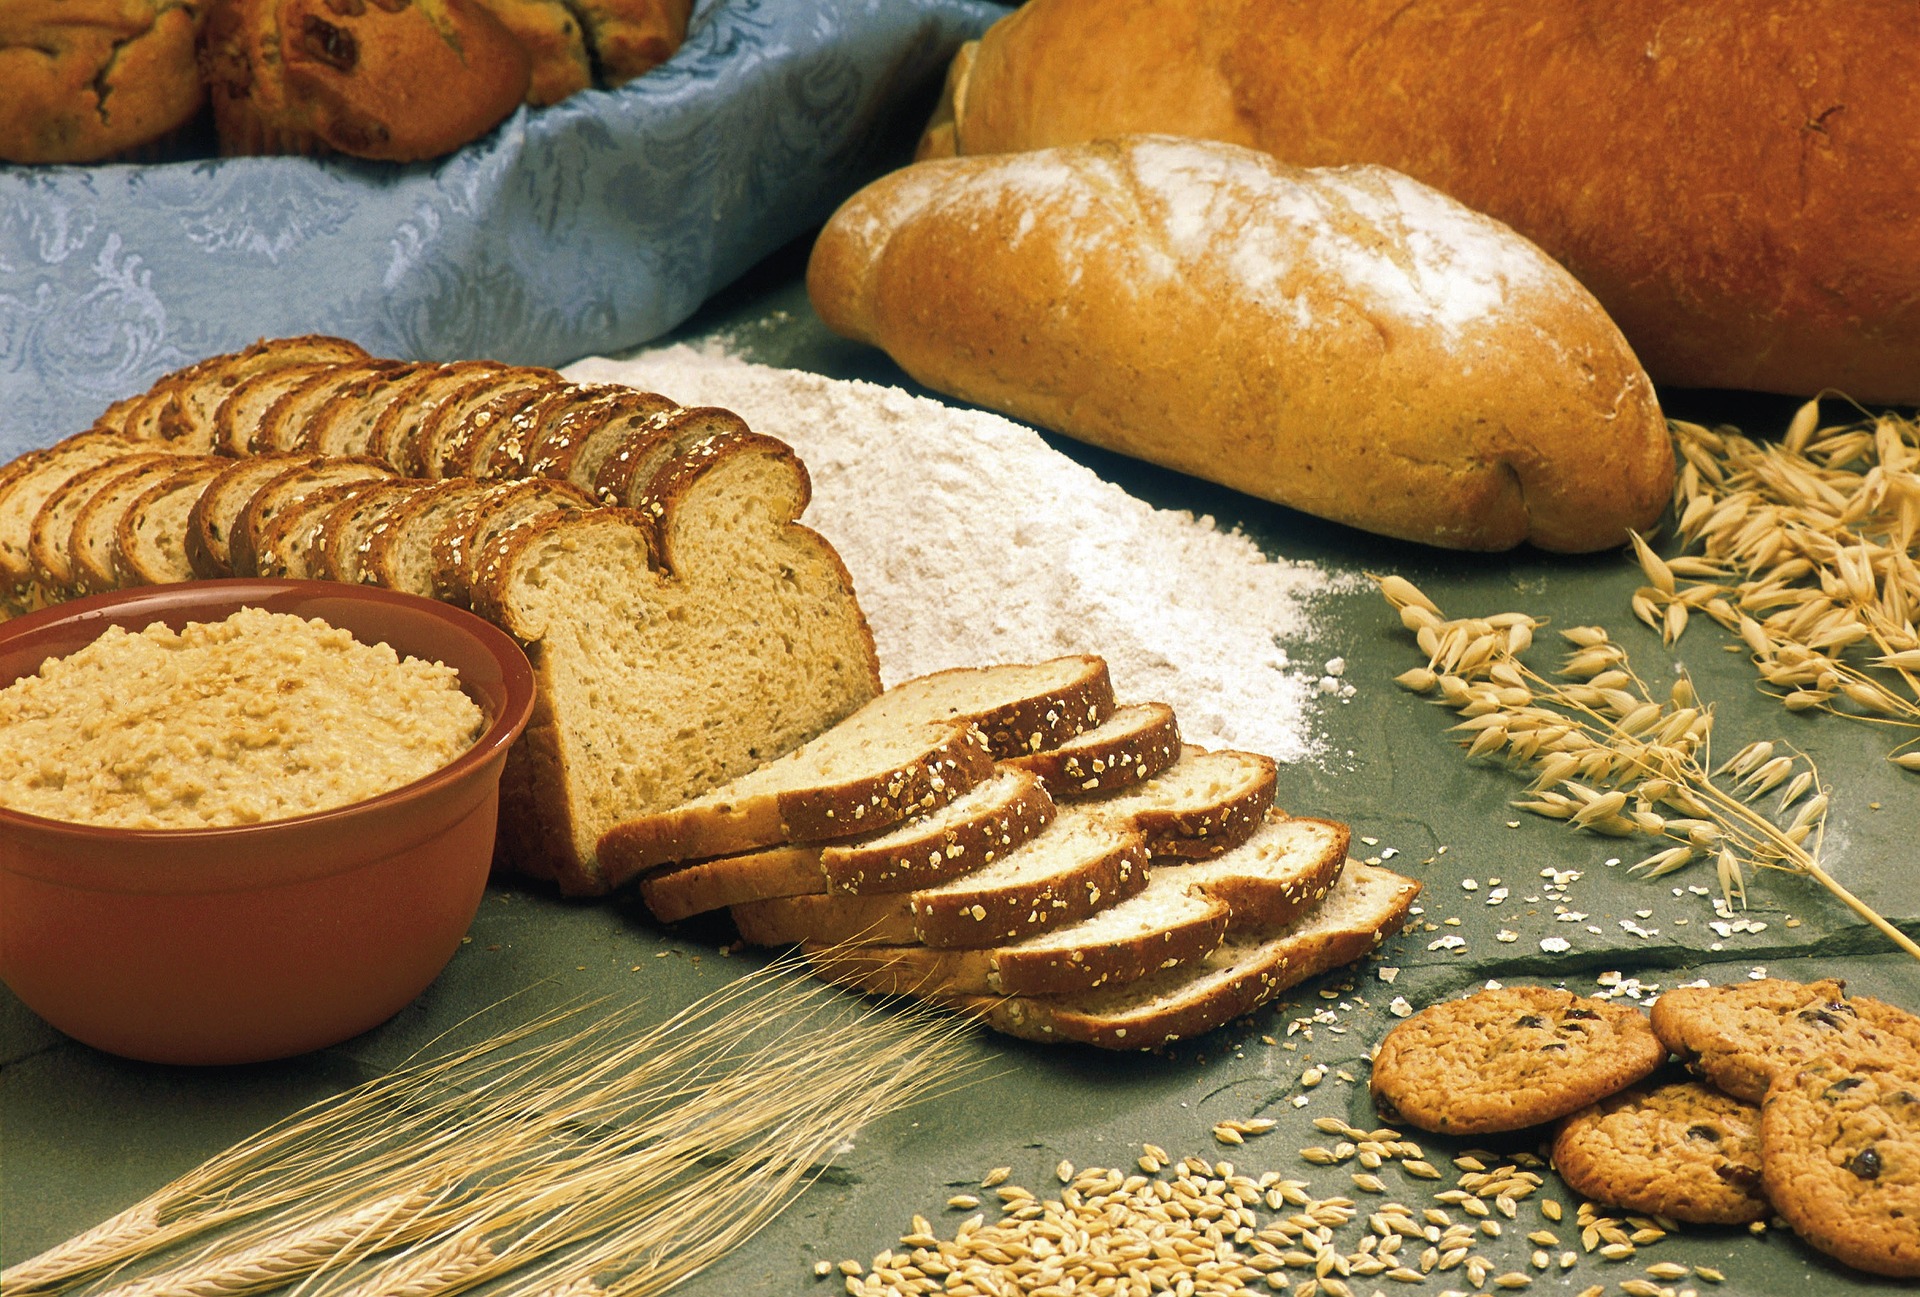 Grains of wheat and loaves of bread